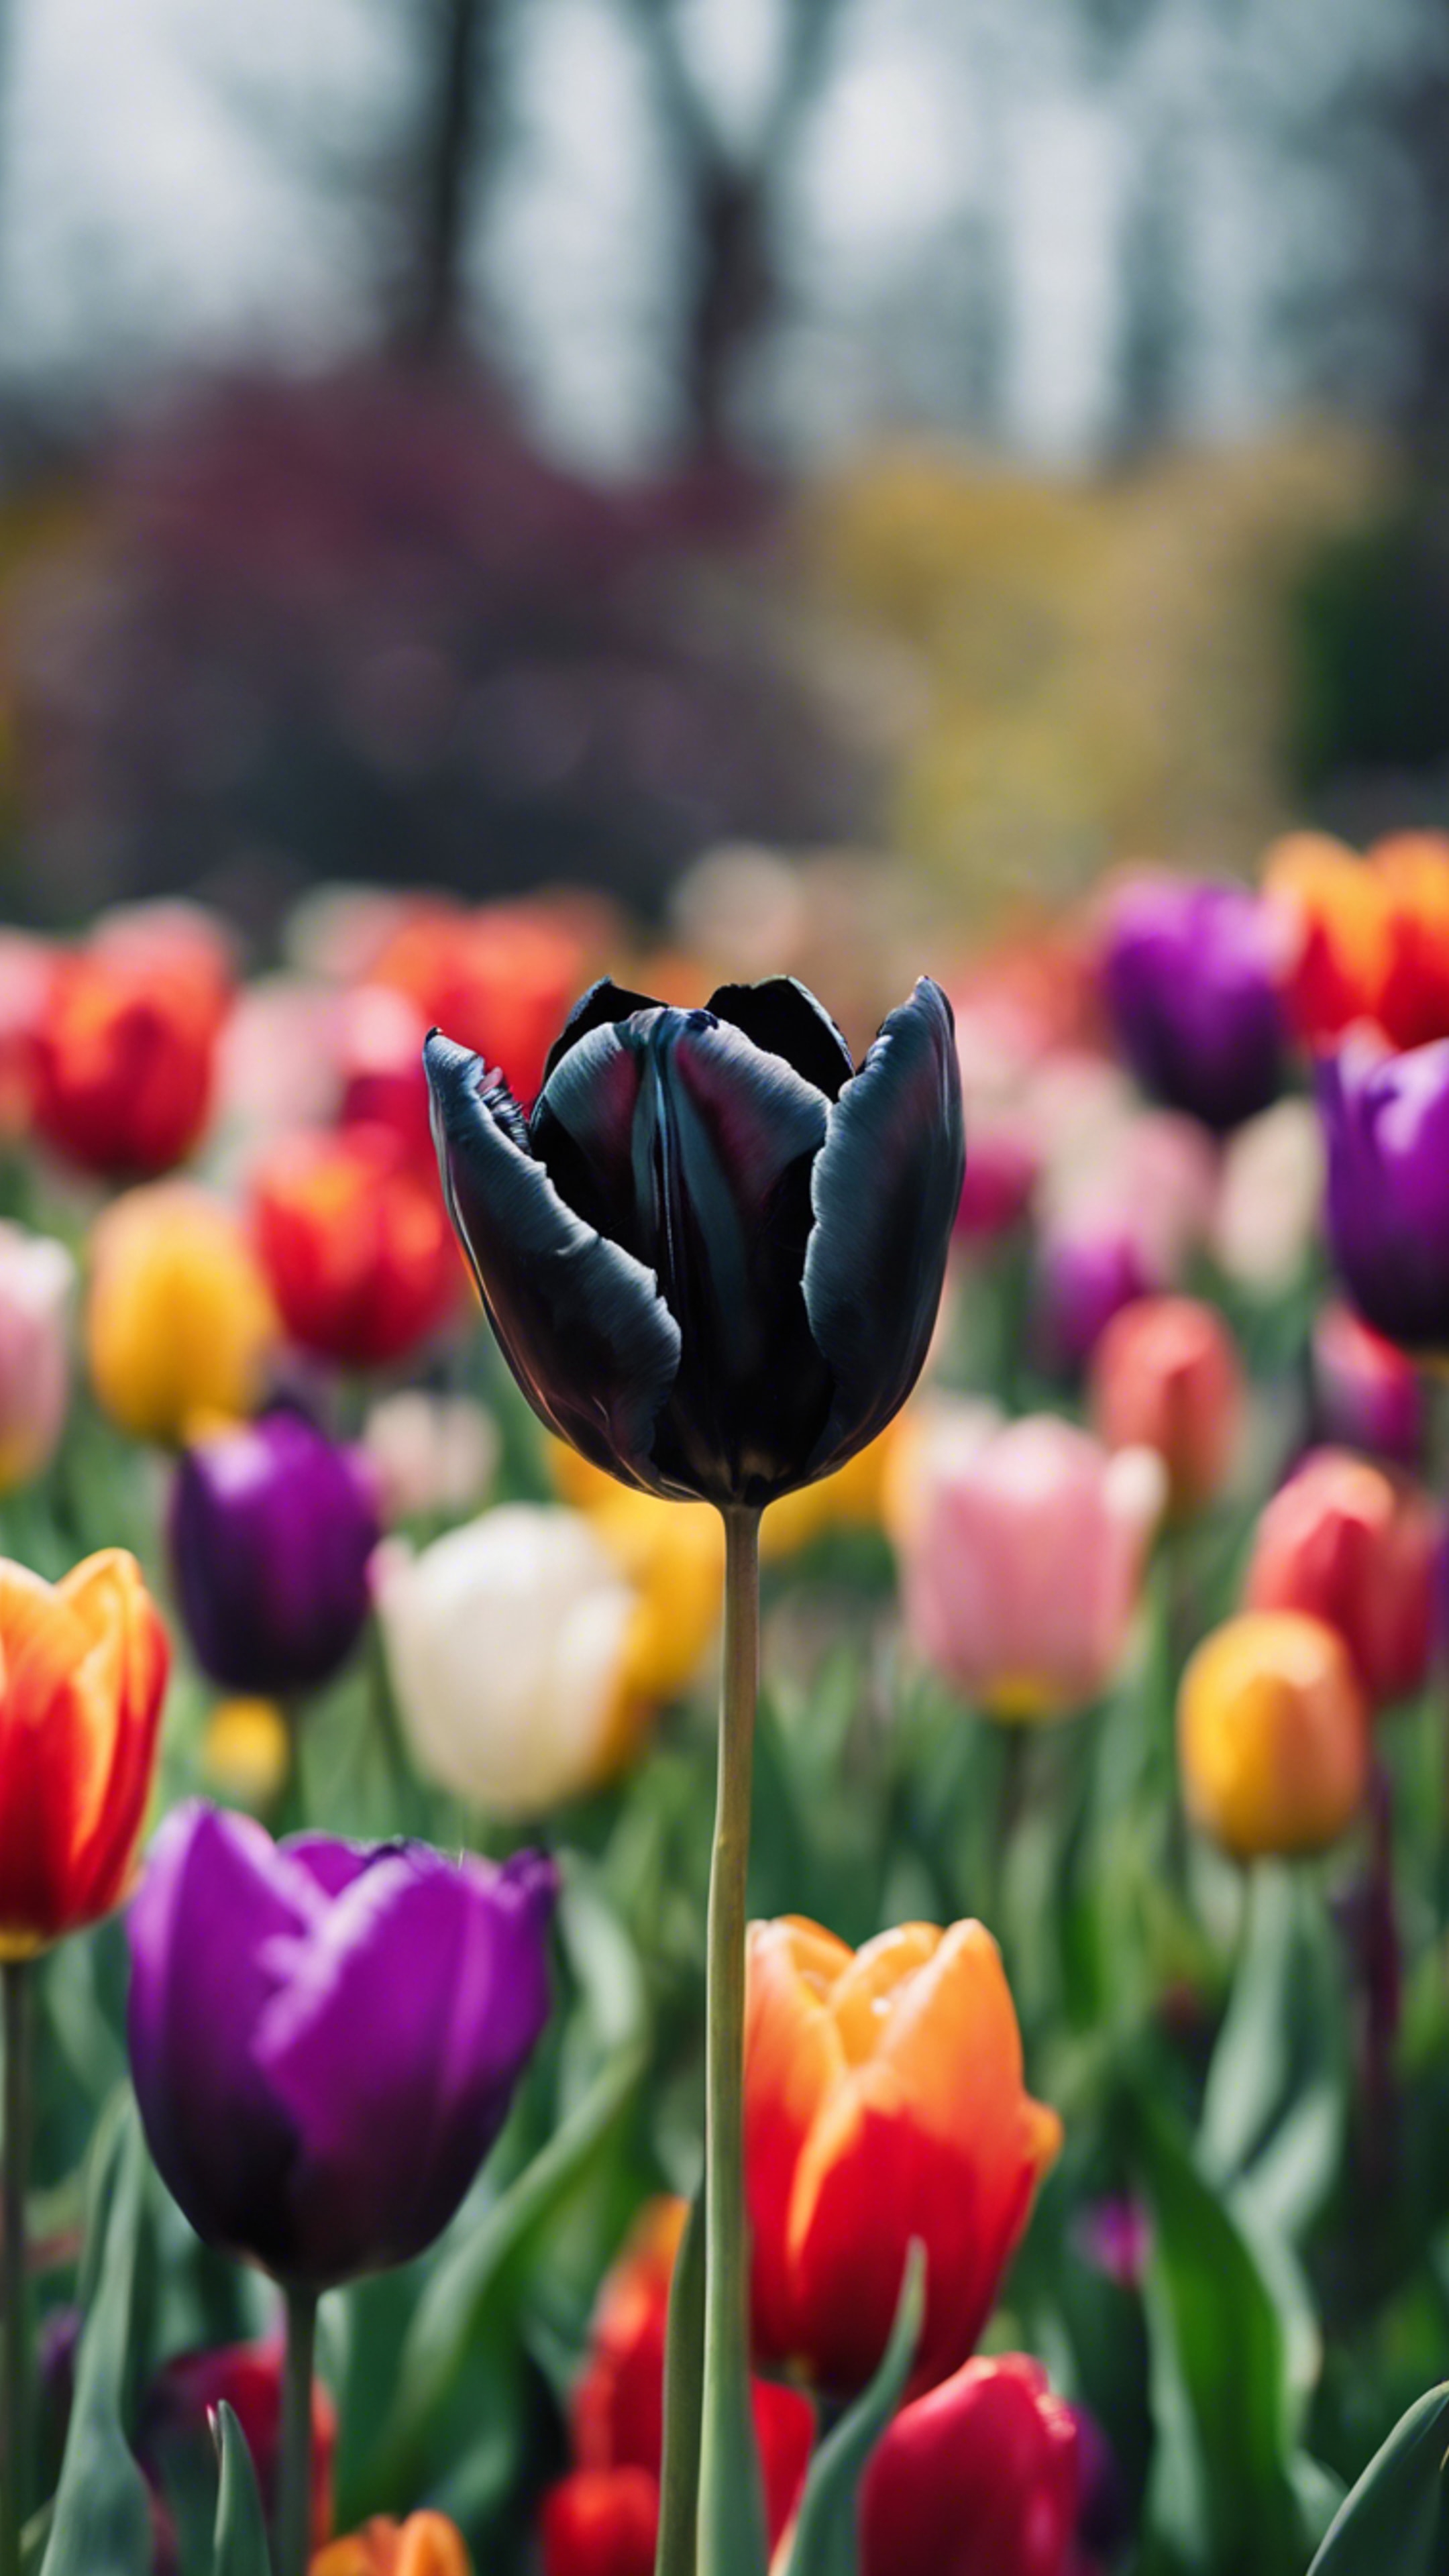 A delicate black tulip, standing out dramatically among a vibrant spray of multicolored tulips in a spring garden. Hintergrund[60dfa6a8a46243228945]